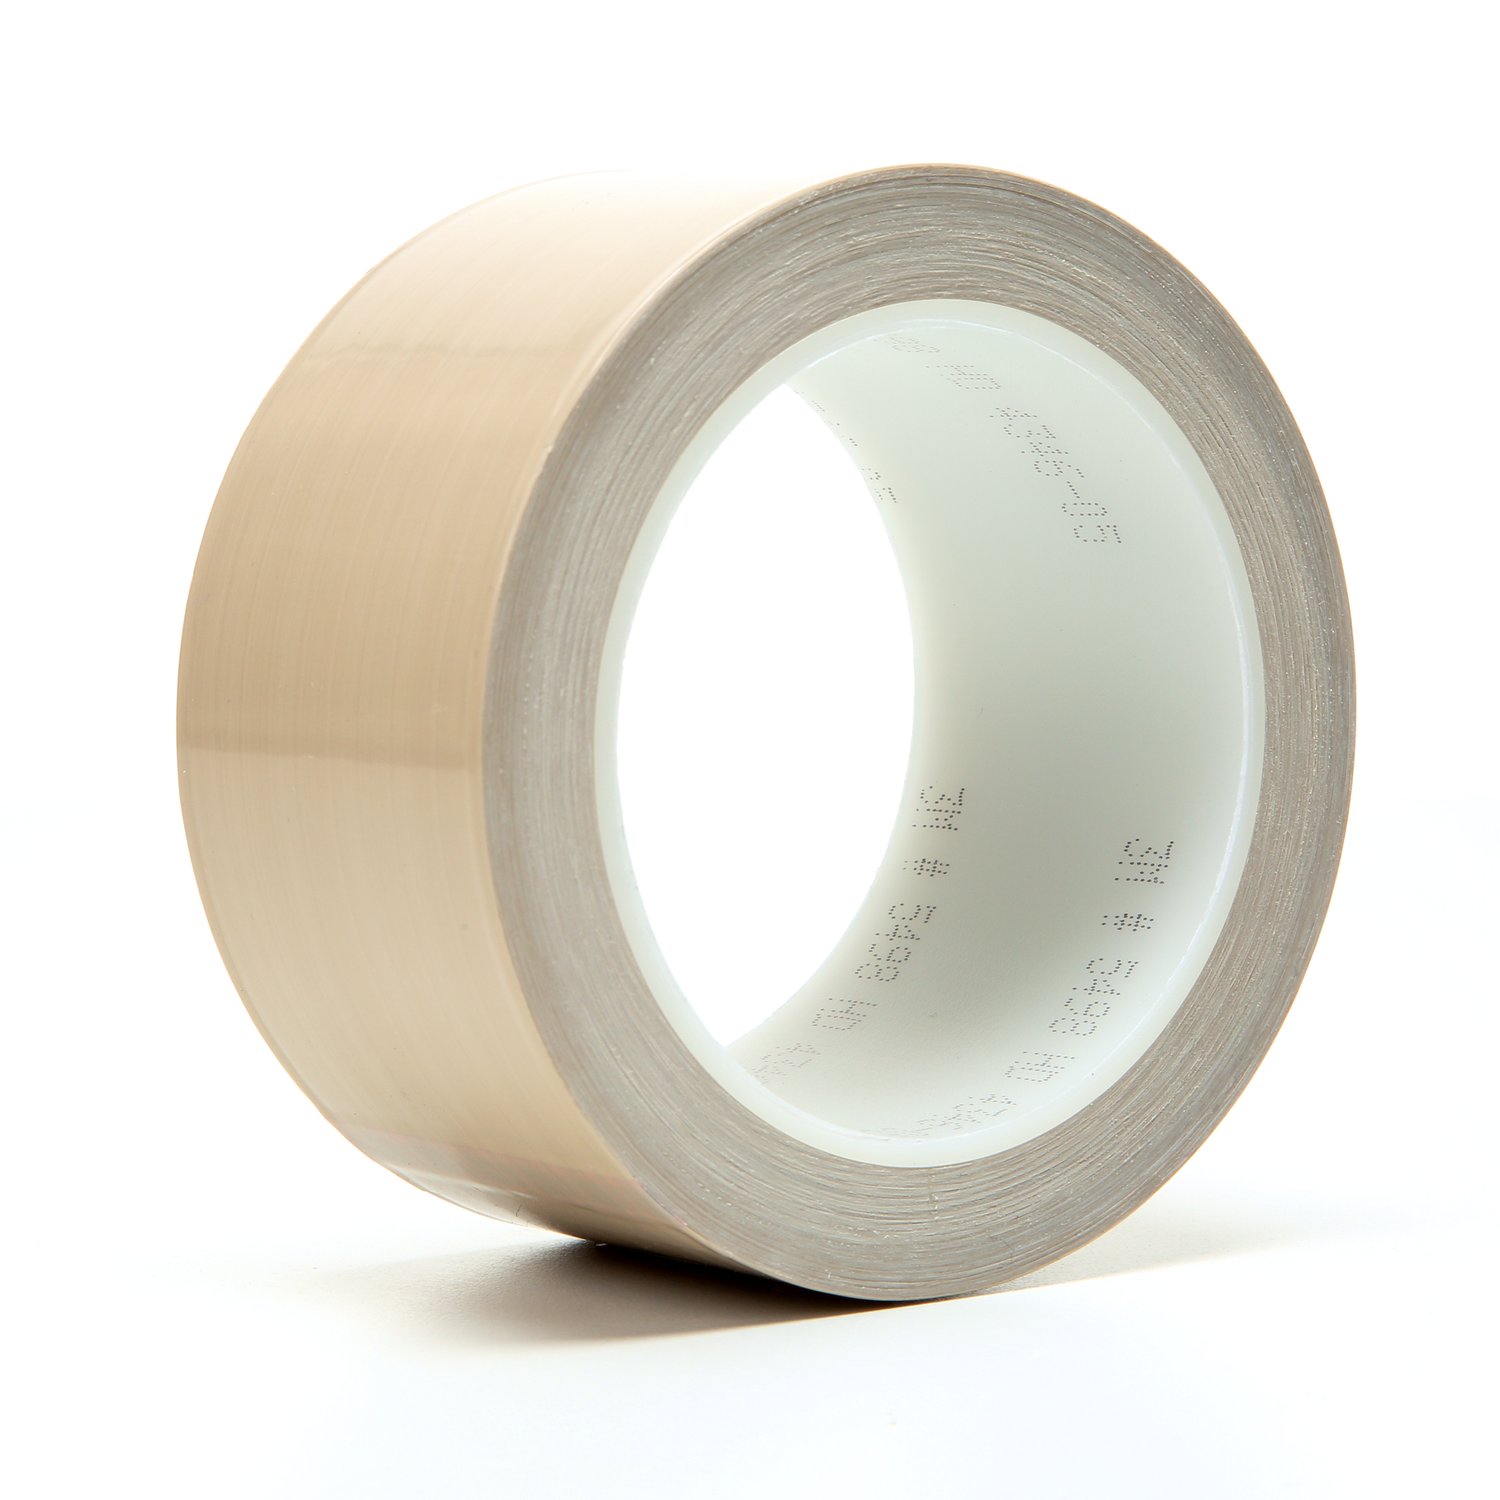 Buy Lexen Slip Tape Roll - PTFE Coated Tape for Smooth Installation